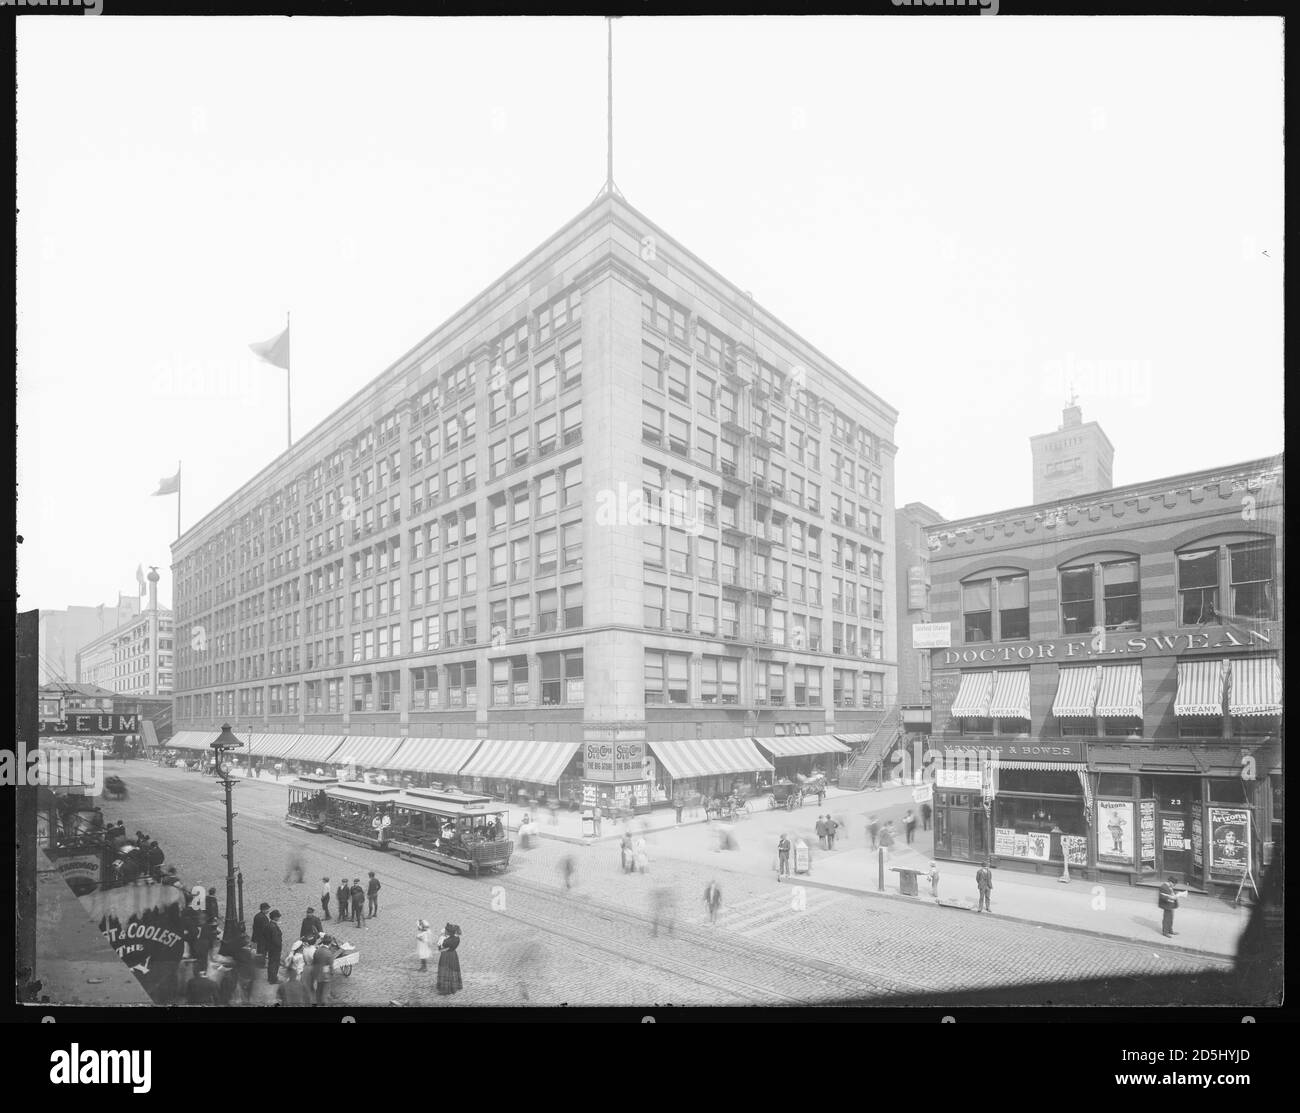 Exterior view of Siegel, Cooper & Company (Second Leiter Building), South  State Street, Chicago, Illinois, circa 1905 Stock Photo - Alamy